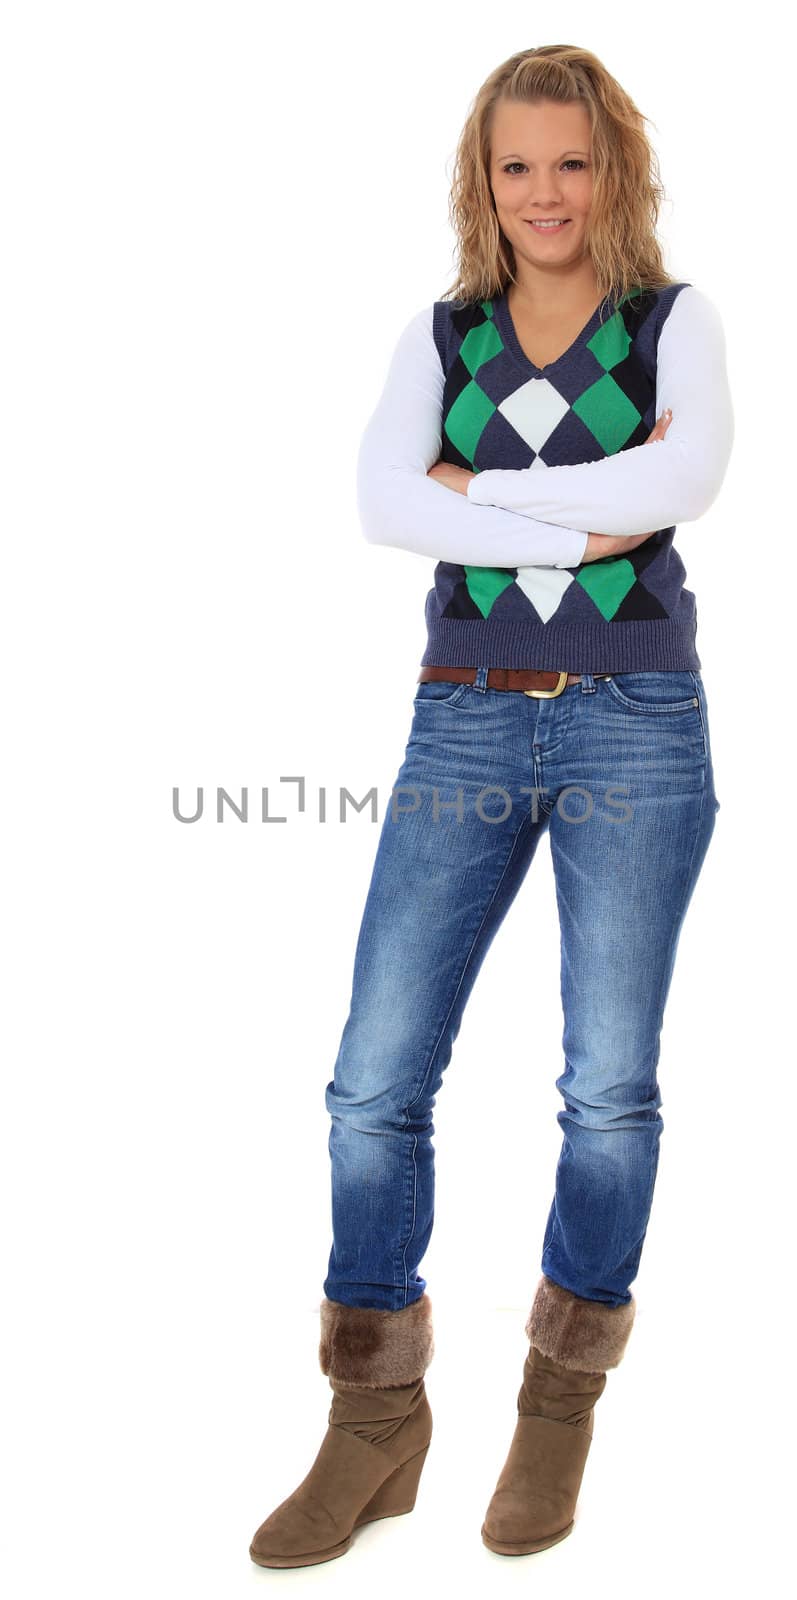 Attractive young woman standing. All on white background.